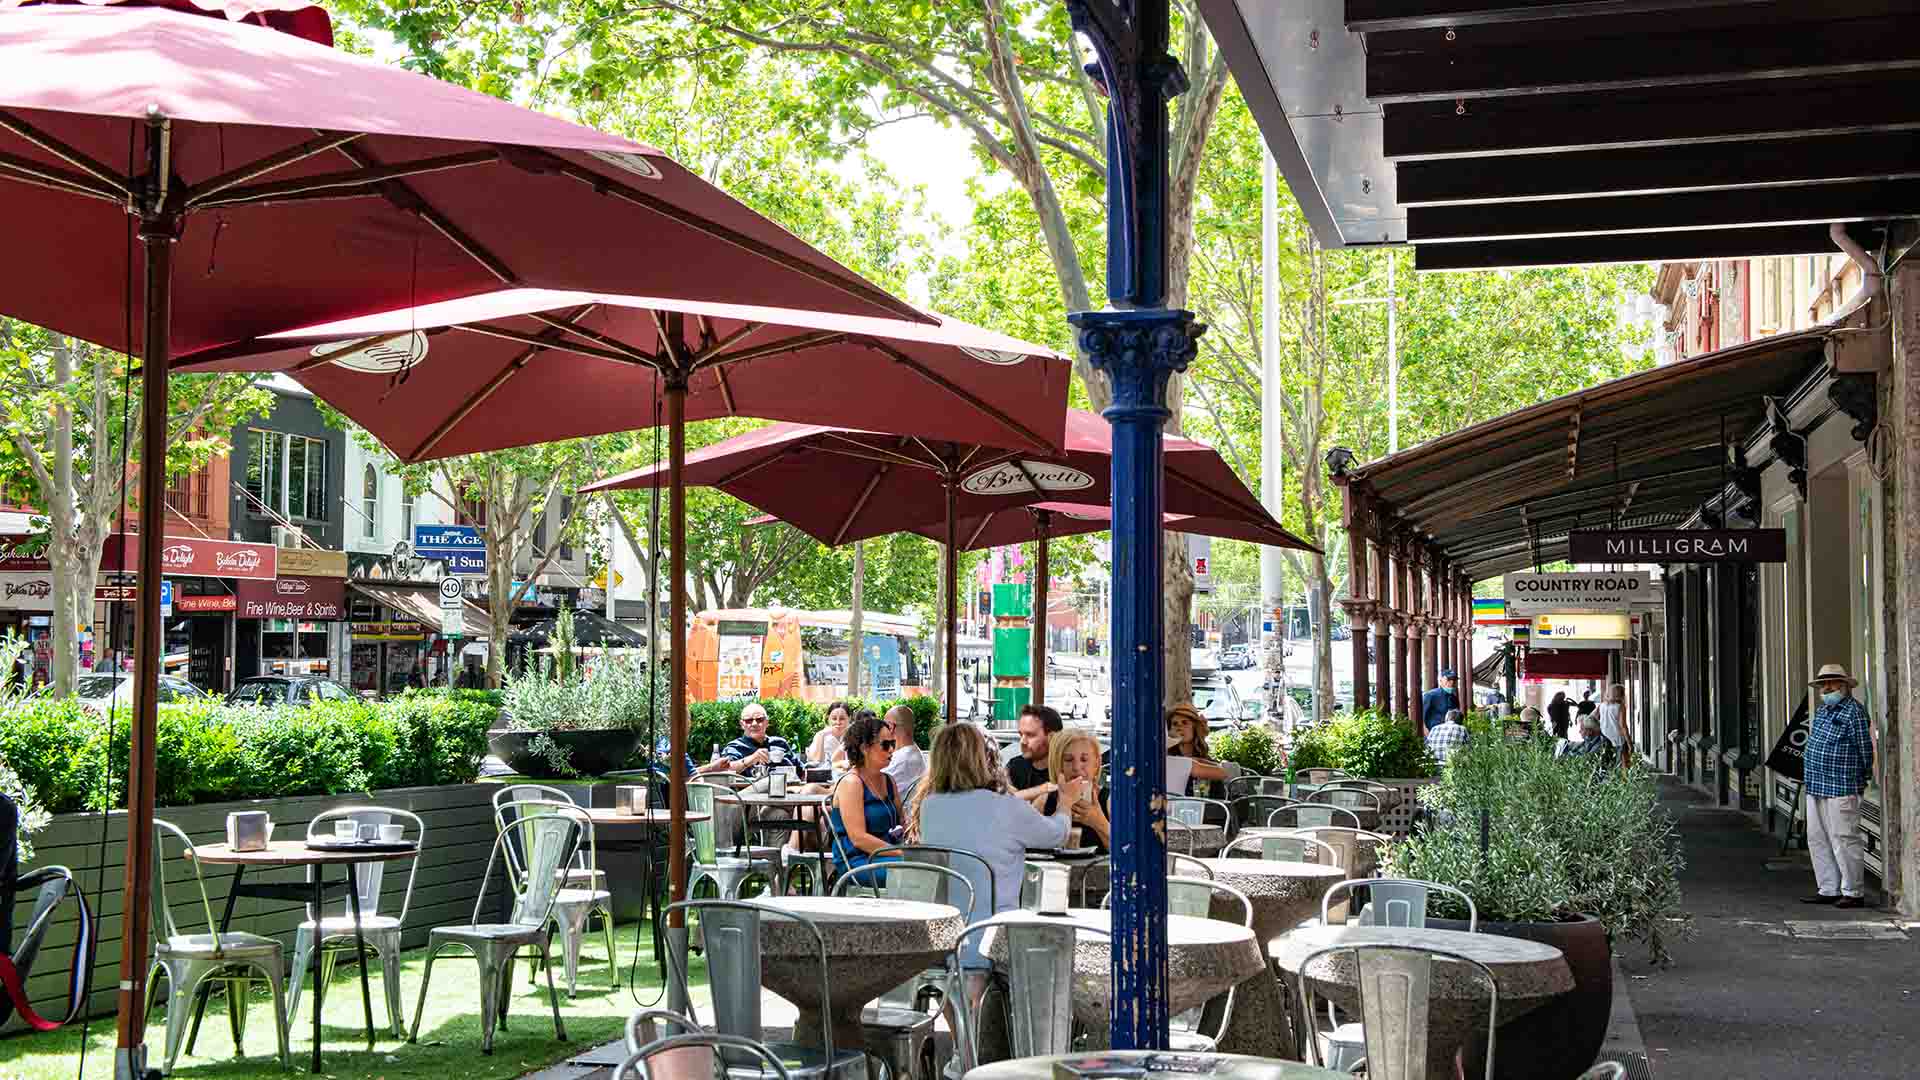 Melbourne Is Getting Another Dining Rebate Scheme That'll Give You $150 Off Meals in the City